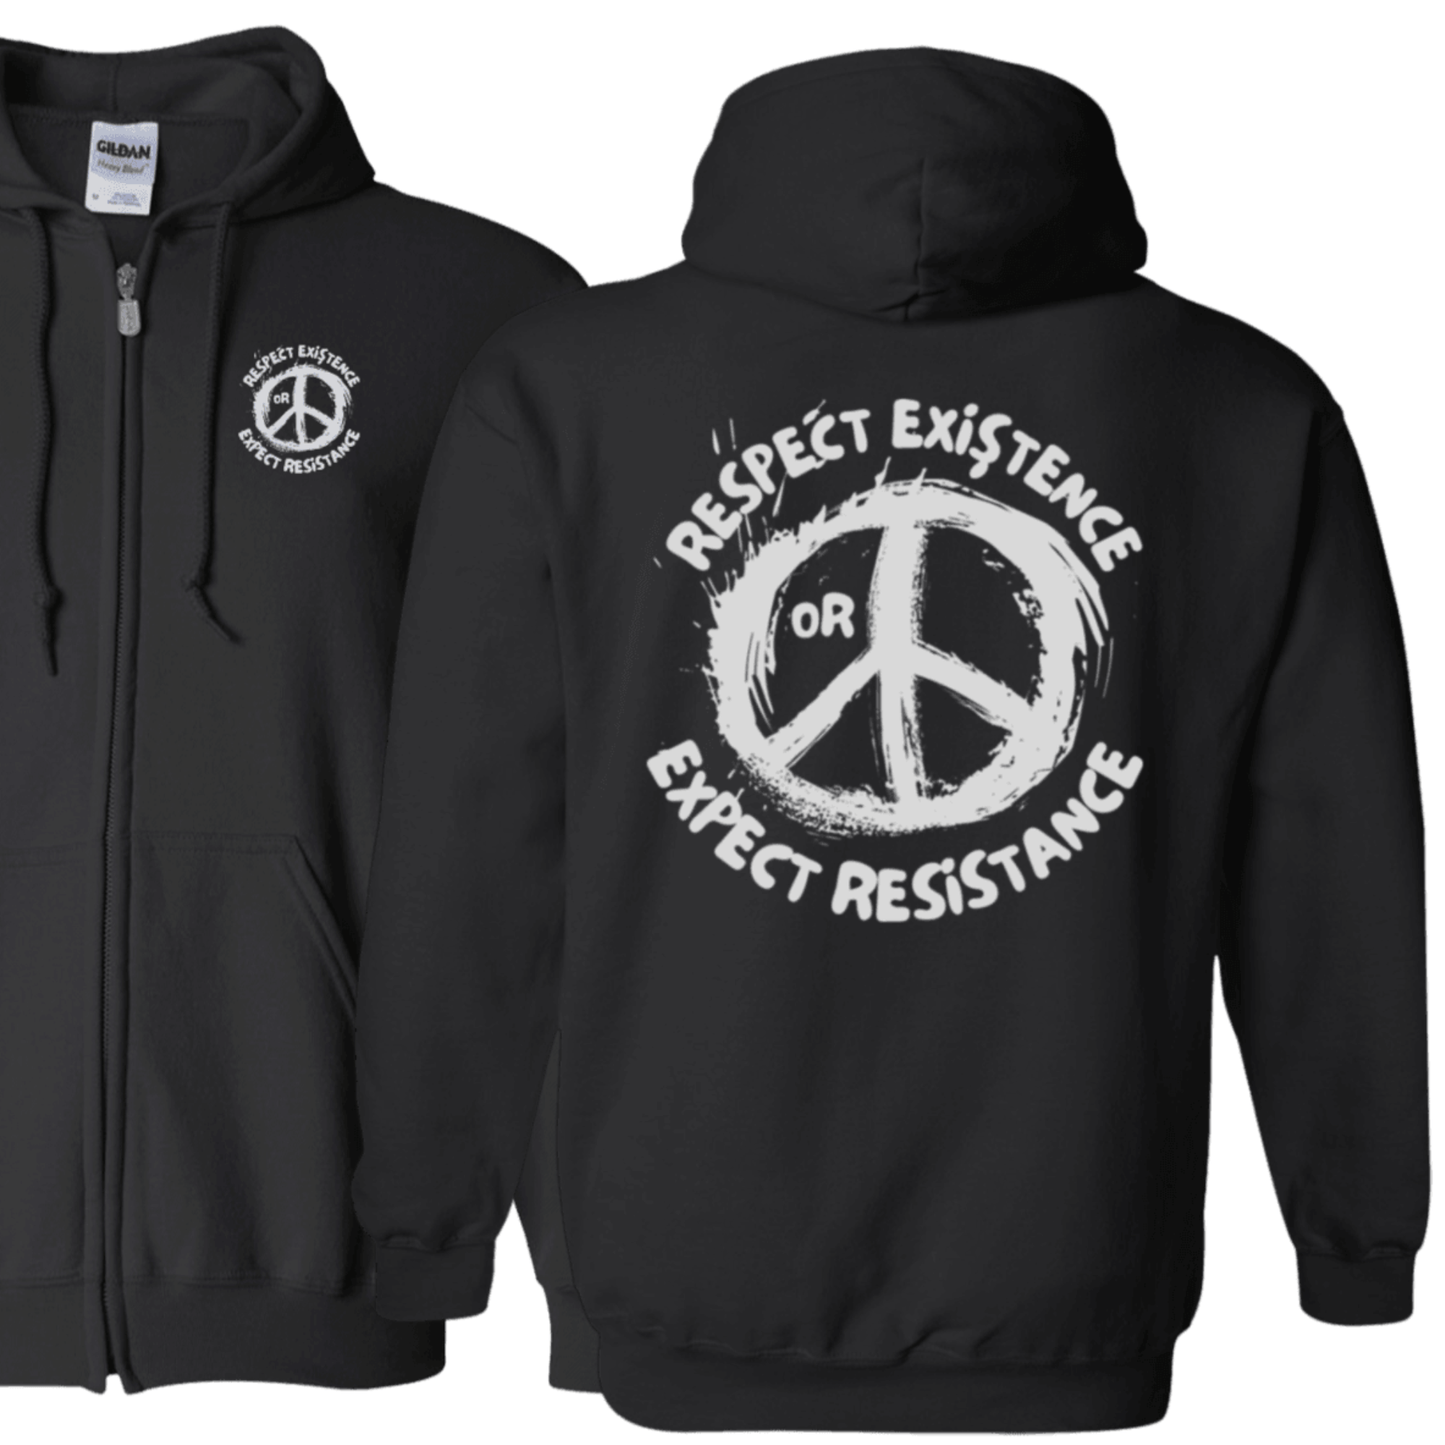 Respect Existence or Expect Resistance Zip Up Hoodie